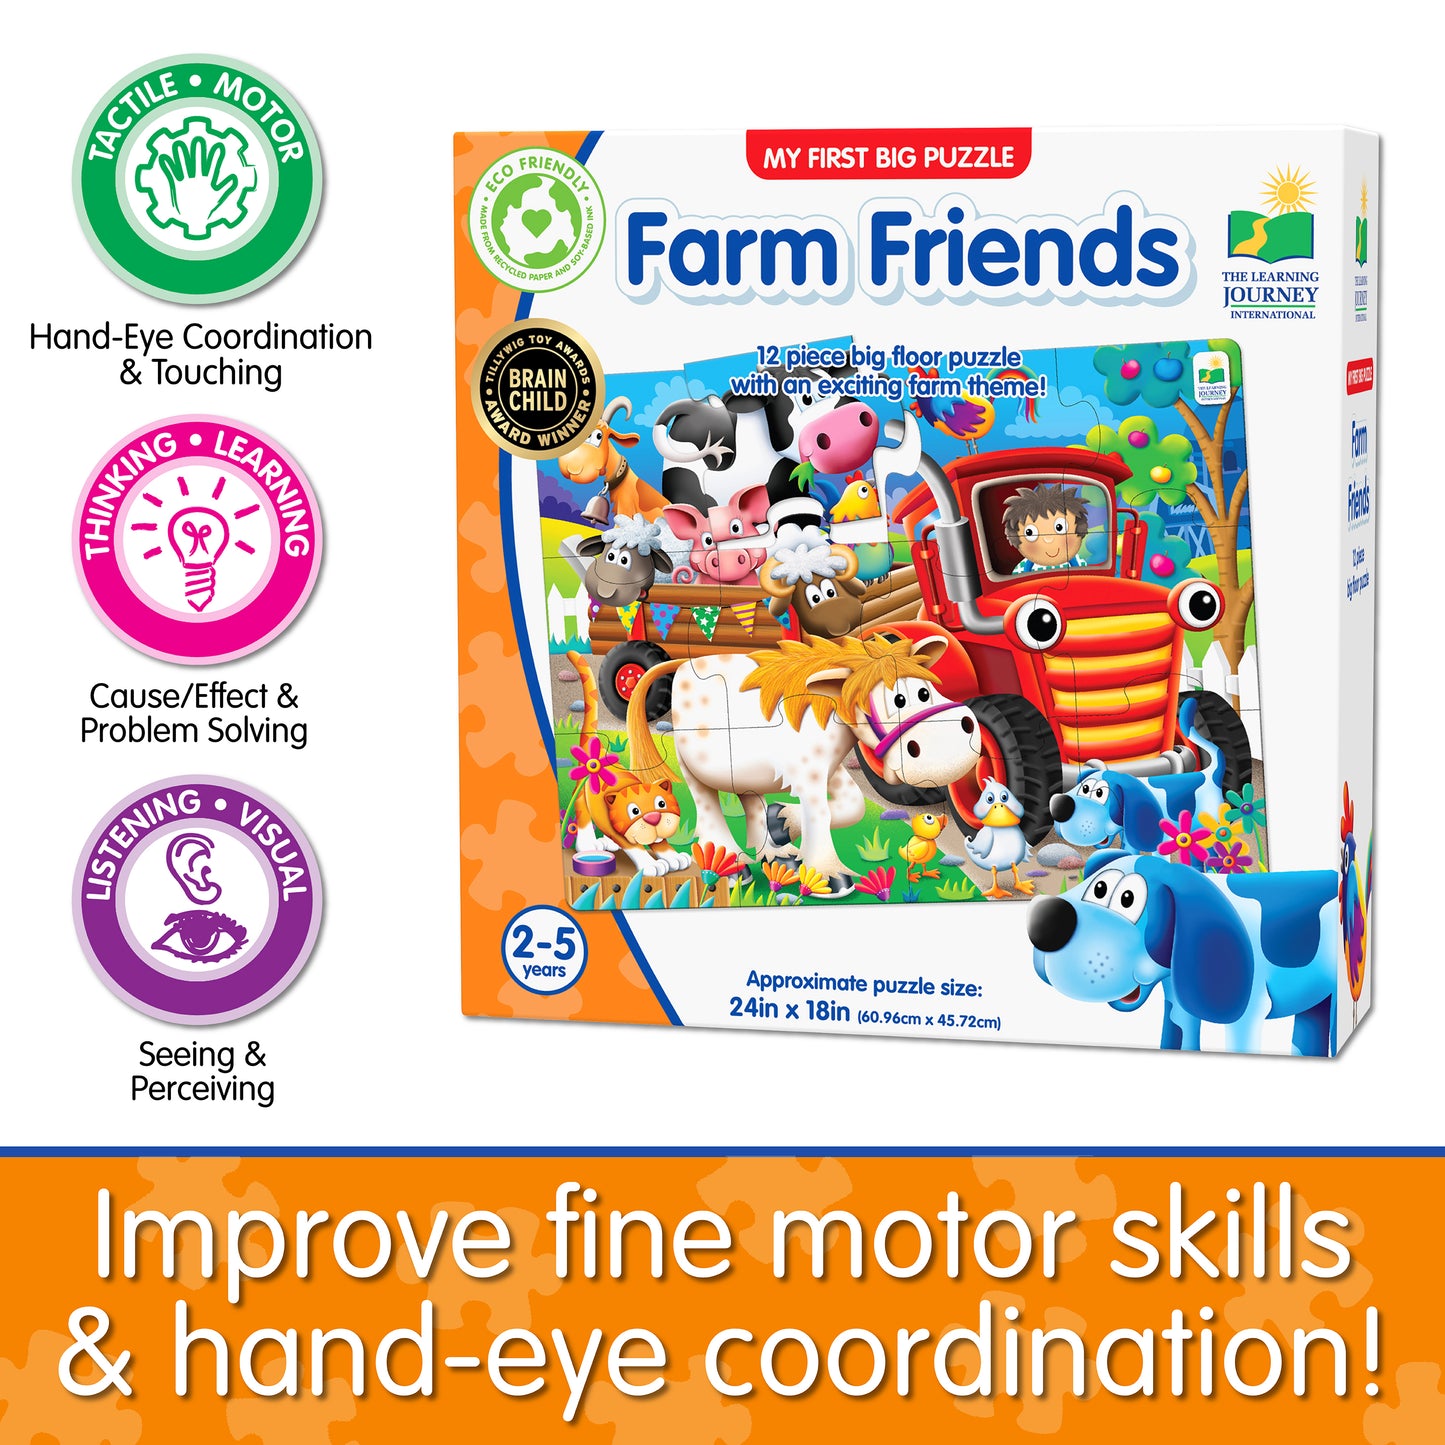 Infographic about My First Big Puzzle - Farm Friends' educational benefits that says, "Improve fine motor skills and hand-eye coordination!"